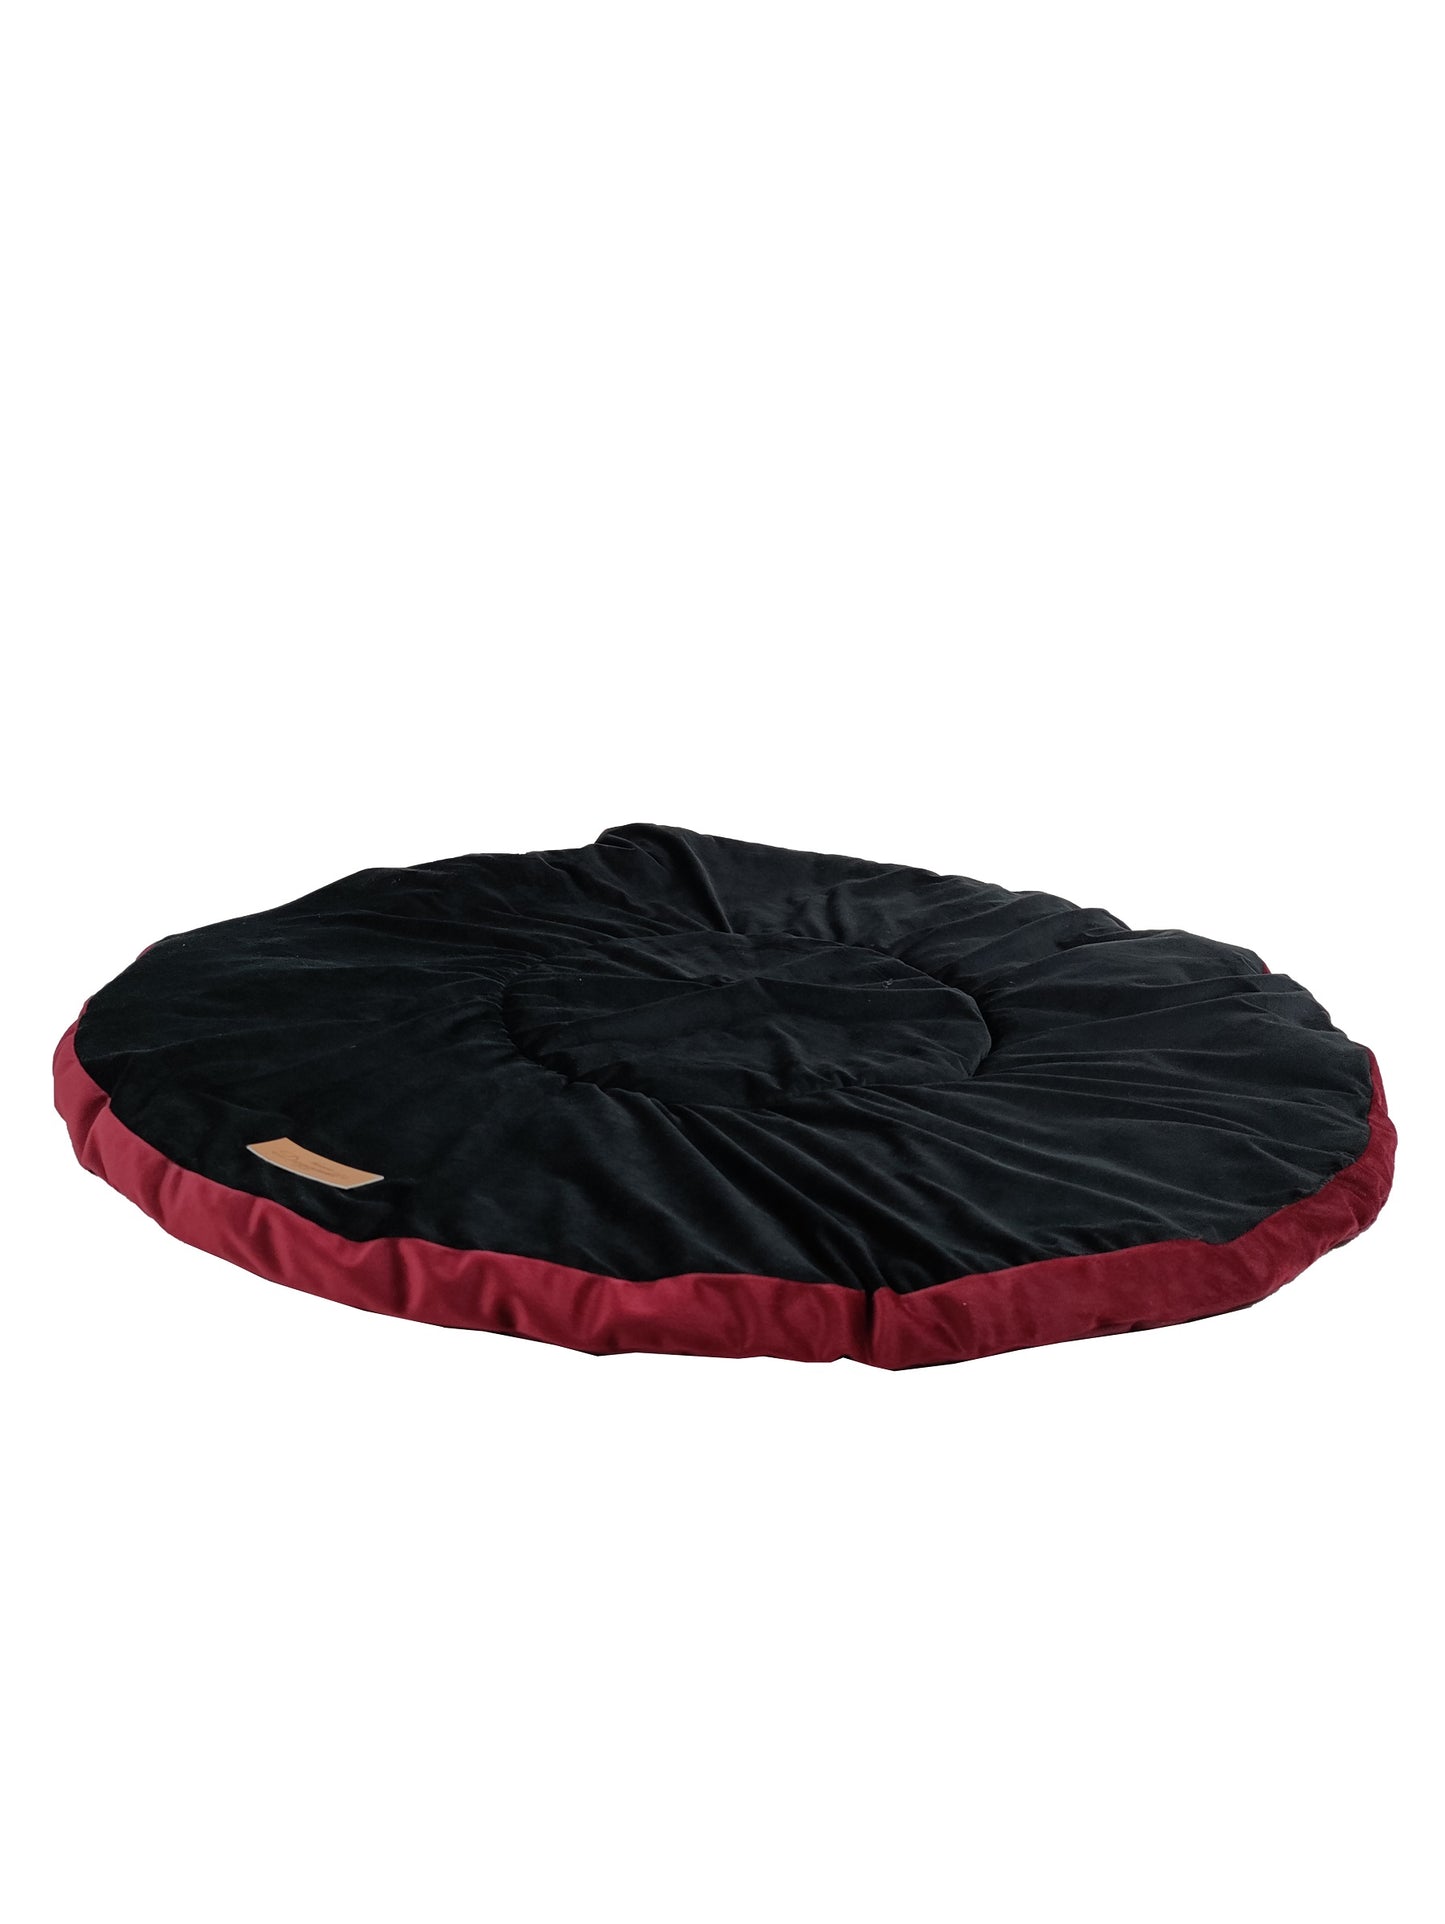 Velvet Pet Bed Mattress | Soft Cozy Fluffy Round Flat Bed | Washable Padded Pet Bed| Light Weighted Dog Flat Mat Black/ Maroon